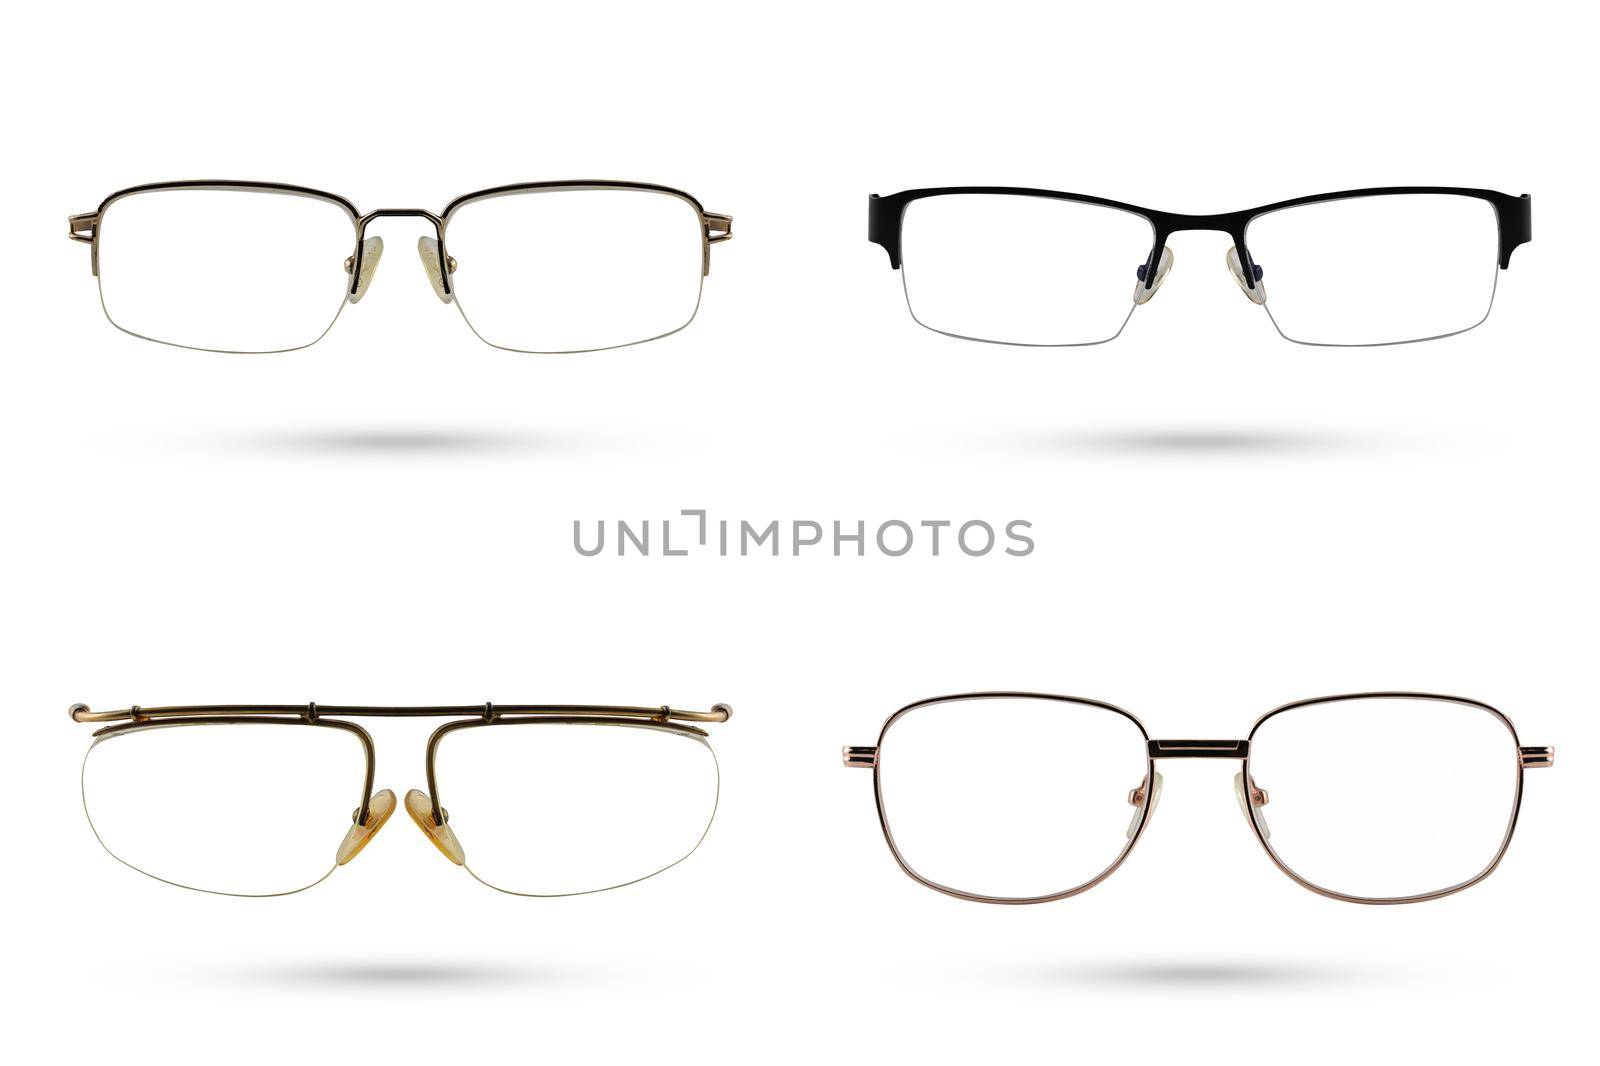 Classic Fashion eyeglasses style collections isolated on white background. by jayzynism